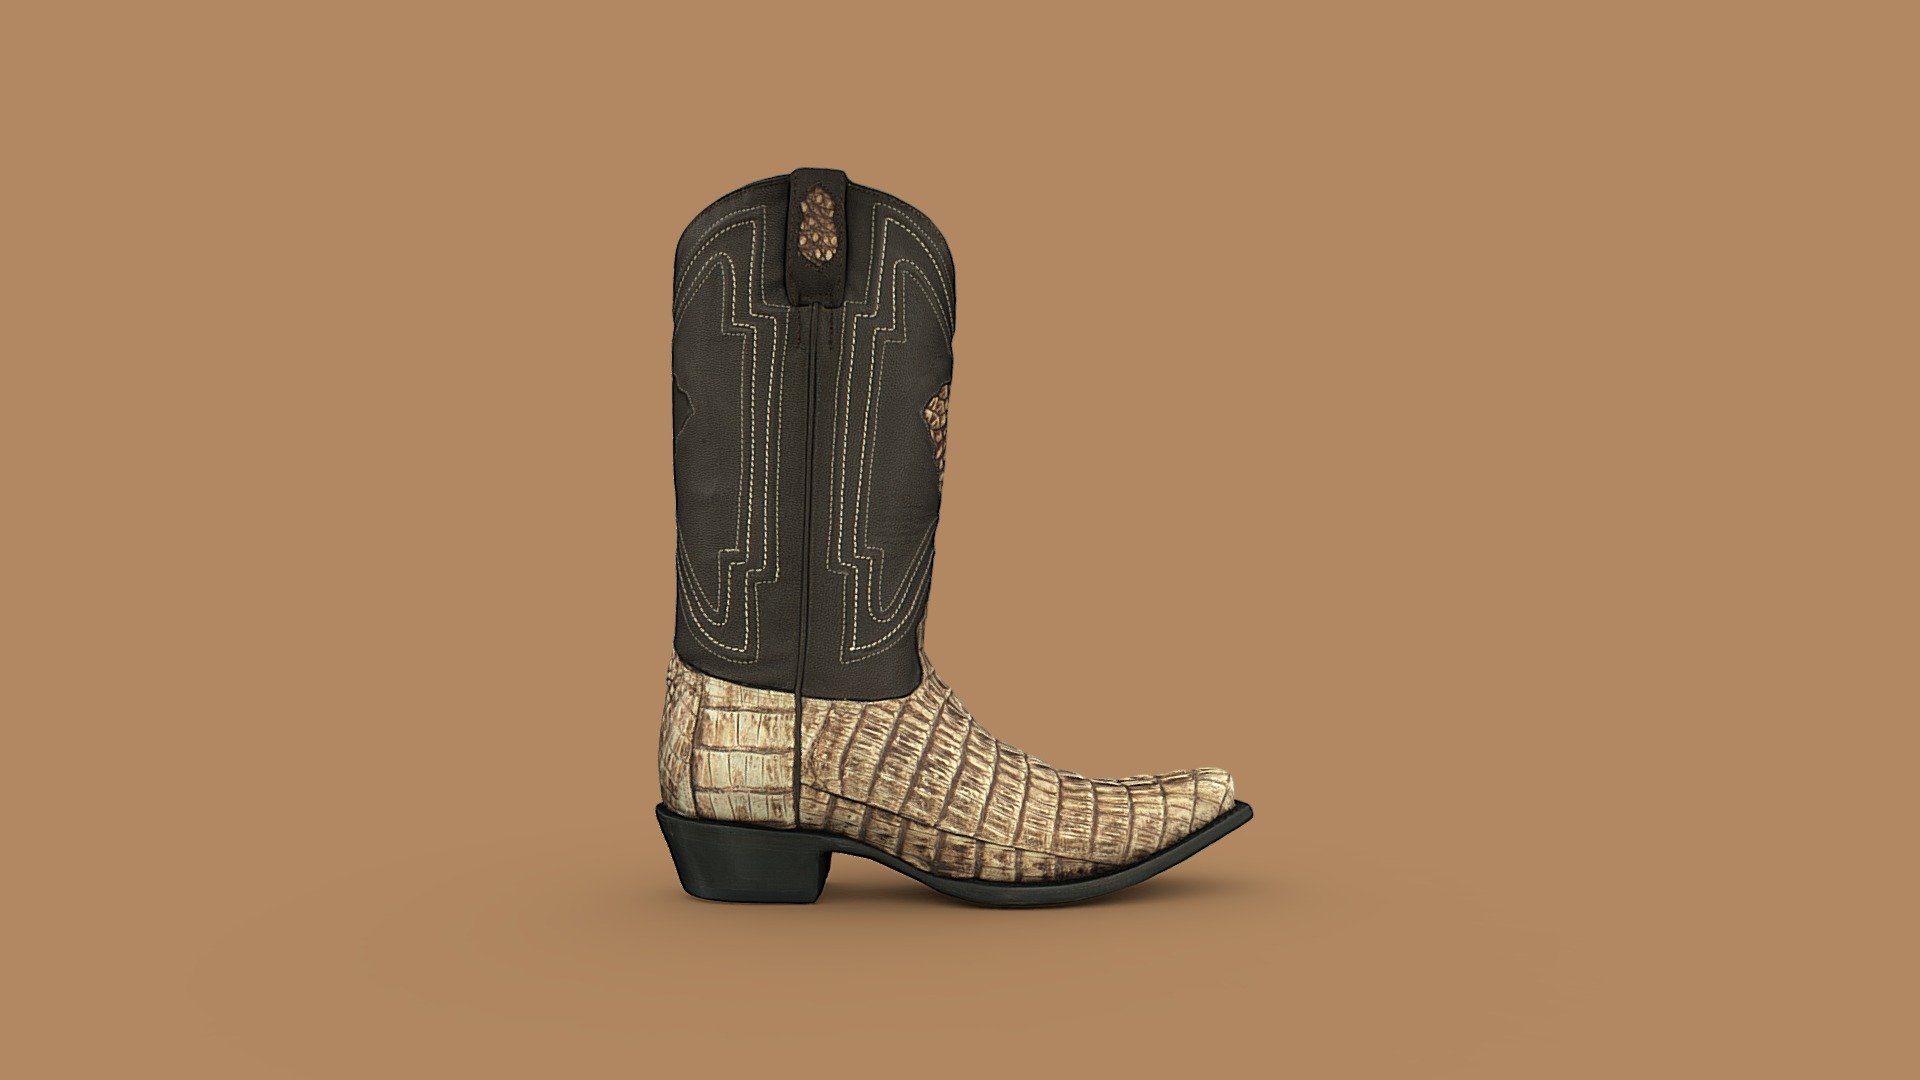 Every pair of Yeehaw Cowboy Boots are put together from the finest exotic skin and leathers for a one of a kind walking experience. Genuinely handcrafted by artisans using traditional boot making skills from past generations. These boots are the choice for those who know and appreciate quality exotic skin boots made to last. Order the physical product here.

This model was created using Switch 3D's innovative scanning technology.

➖

Switch 3D 

Want professional 3D scans of your products? Let's talk! 👉 switch3d.co - Yeehaw Cowboy Caiman Tail Boots - Buy Royalty Free 3D model by Switch 3D (@switch3d) 3d model